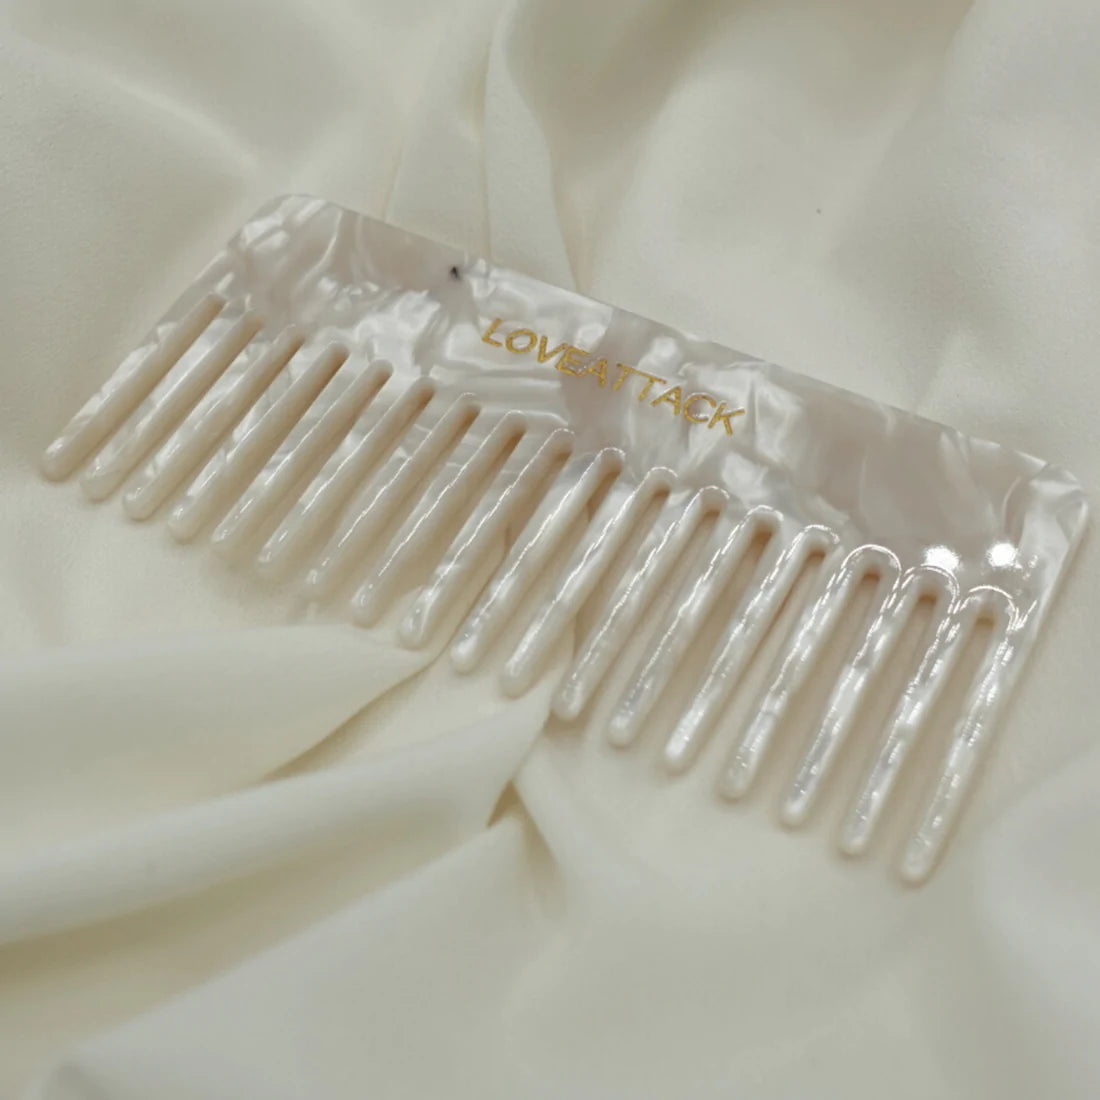 Love Attack -  Wide Tooth Detangling Cellulose Acetate Hair Comb